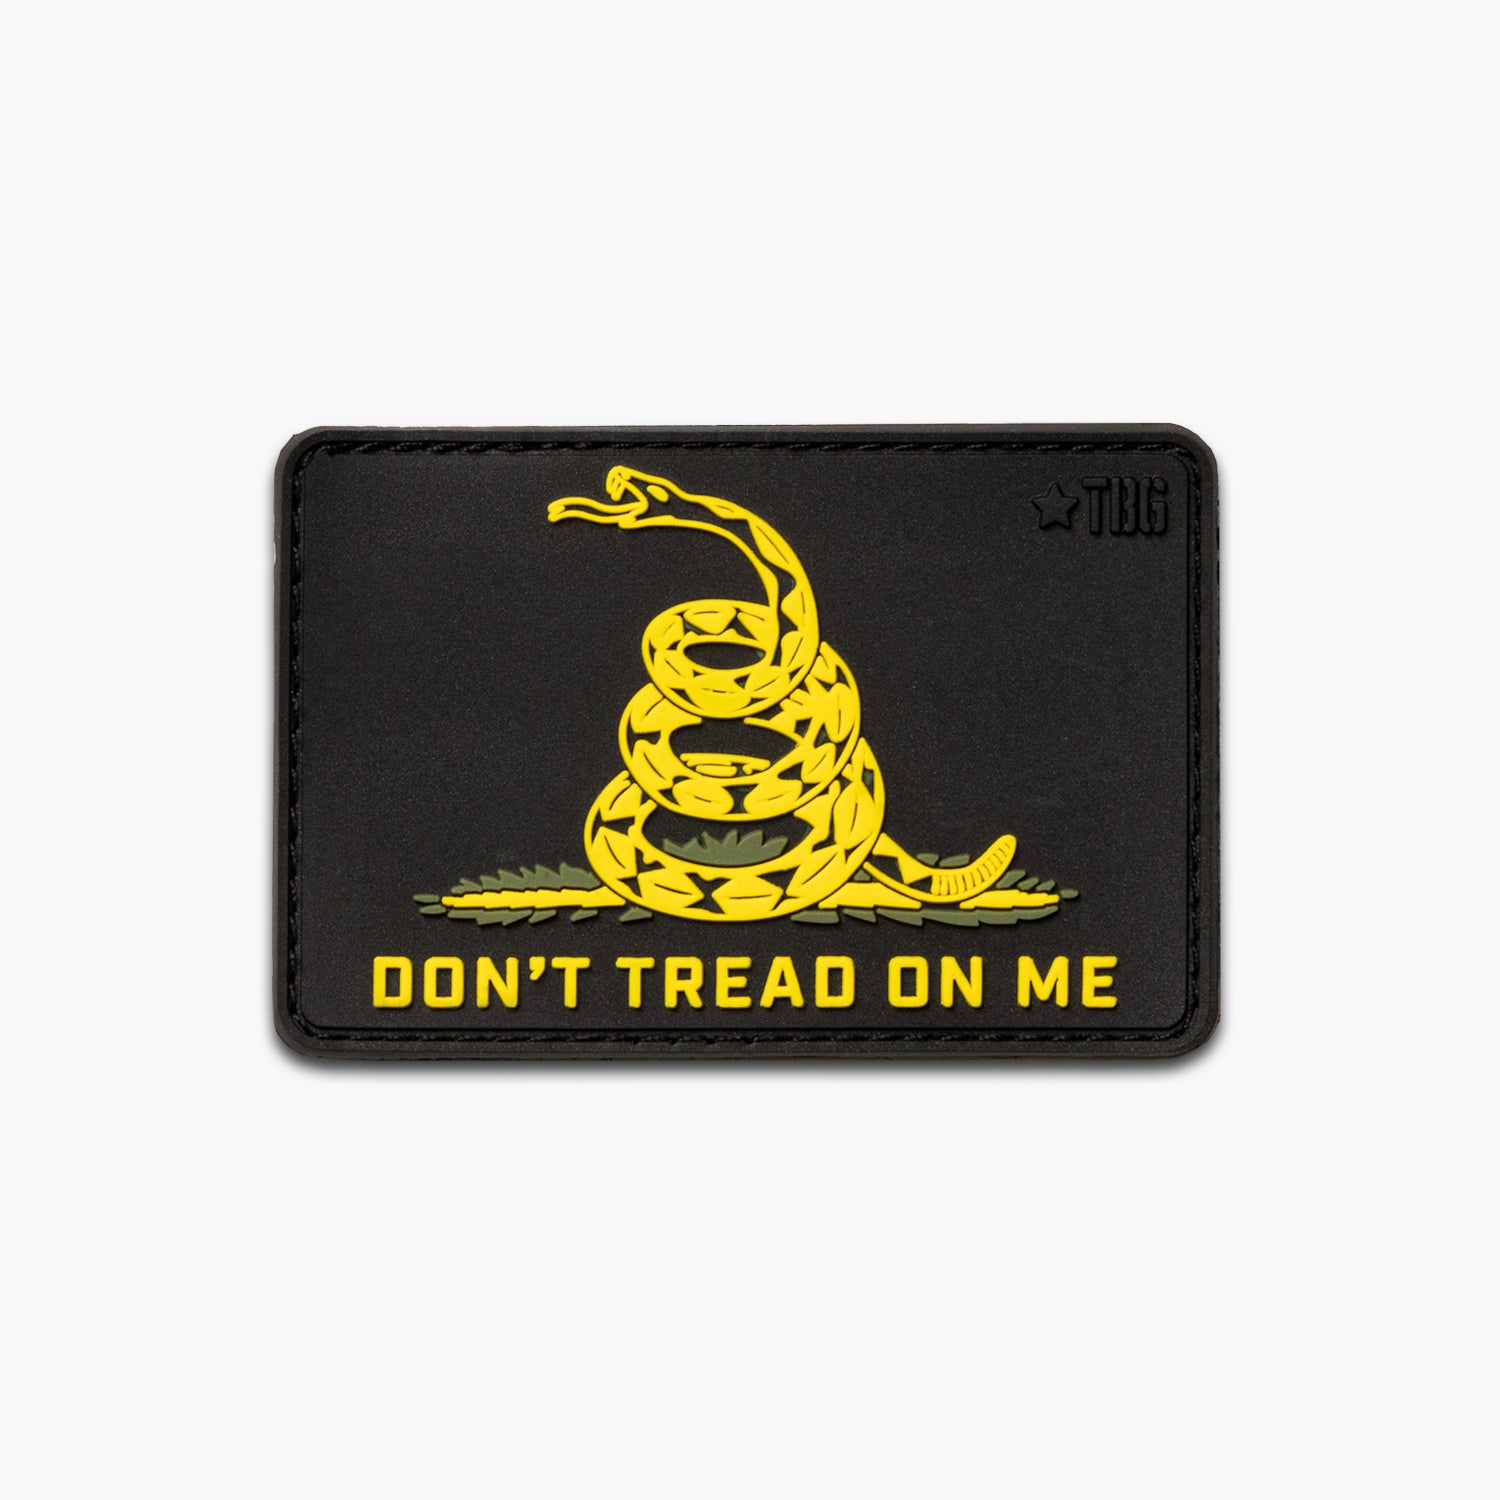 Don't tread on me yellow embroidered military patch with velcro